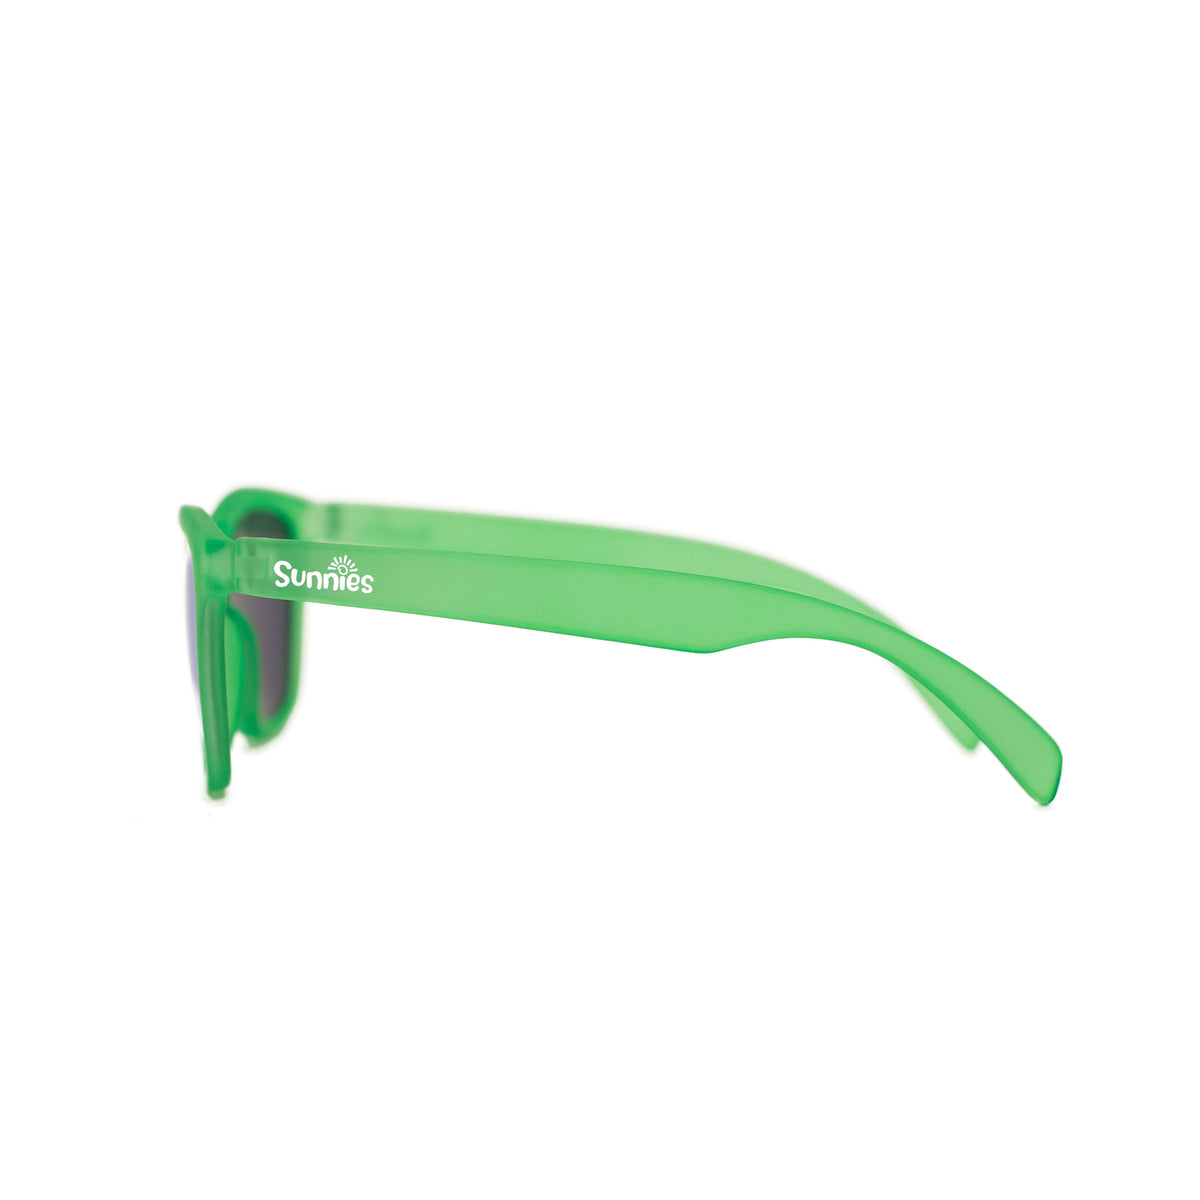 Side view of green sunnies polarized kids sunglasses